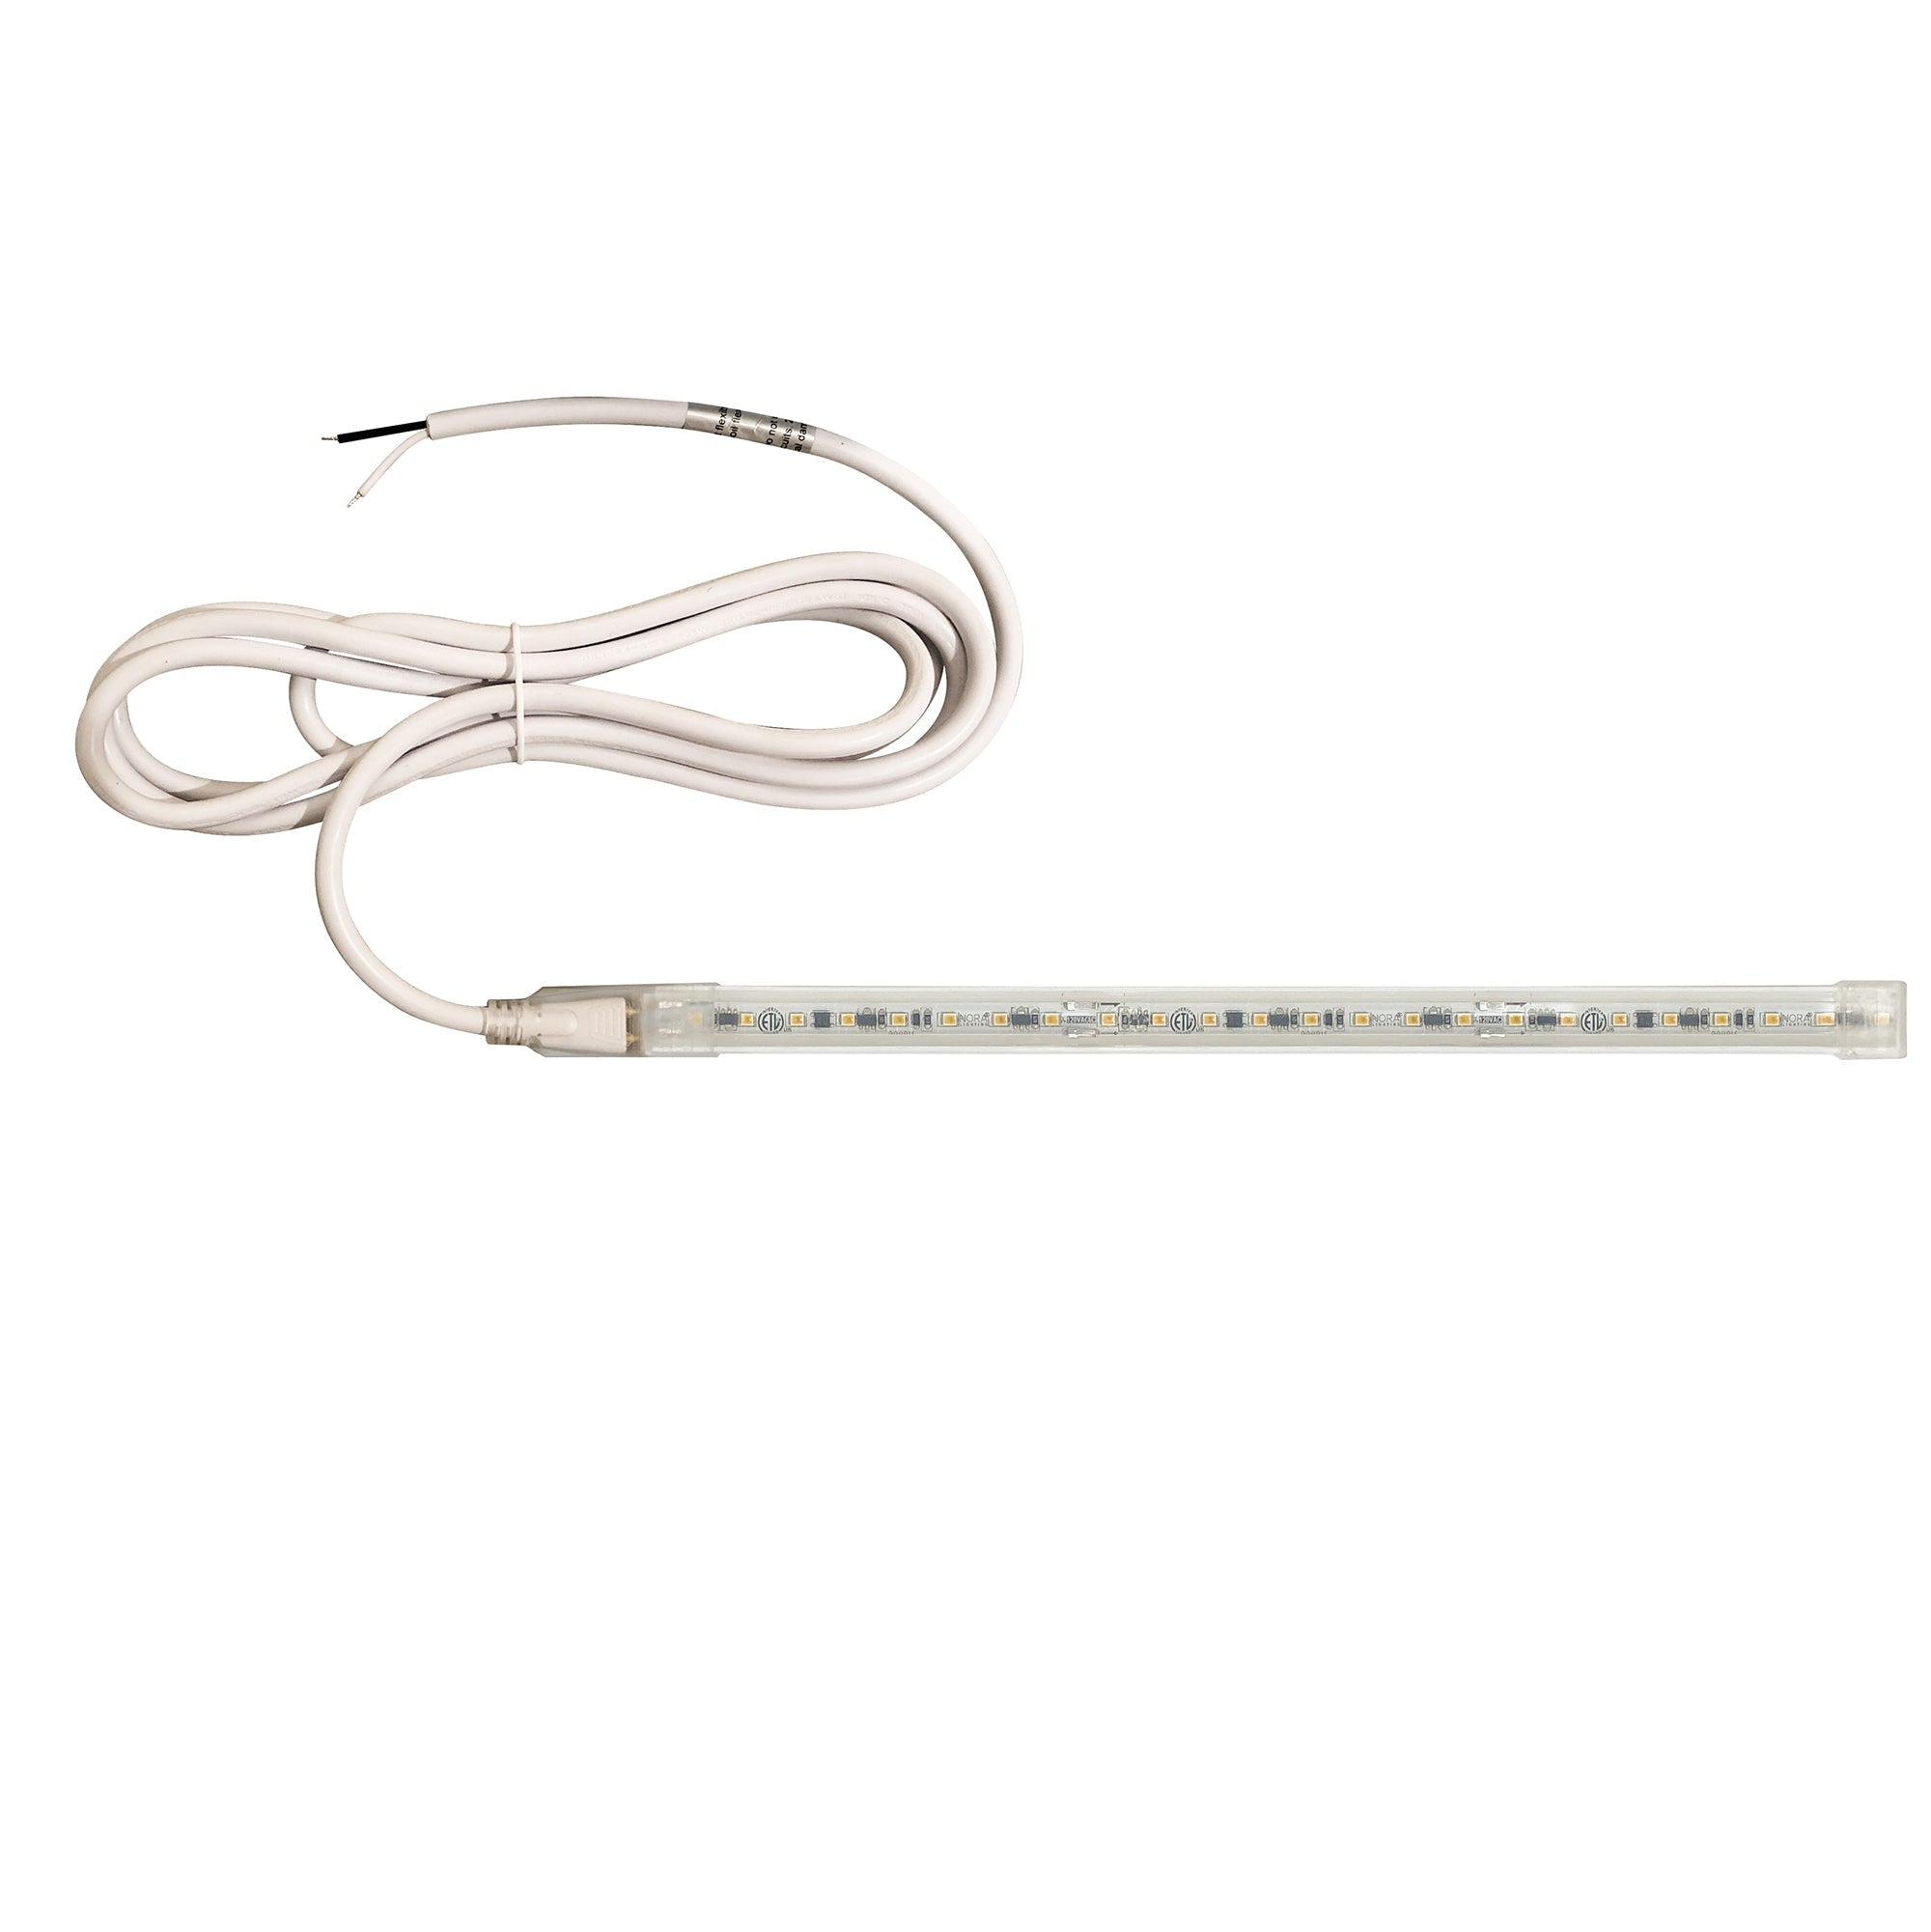 Nora Lighting NUTP13-W70-12-930/HW - Accent / Undercabinet - Custom Cut 70-ft 120V Continuous LED Tape Light, 330lm / 3.6W per foot, 3000K, w/ Mounting Clips and 8' Hardwired Power Cord